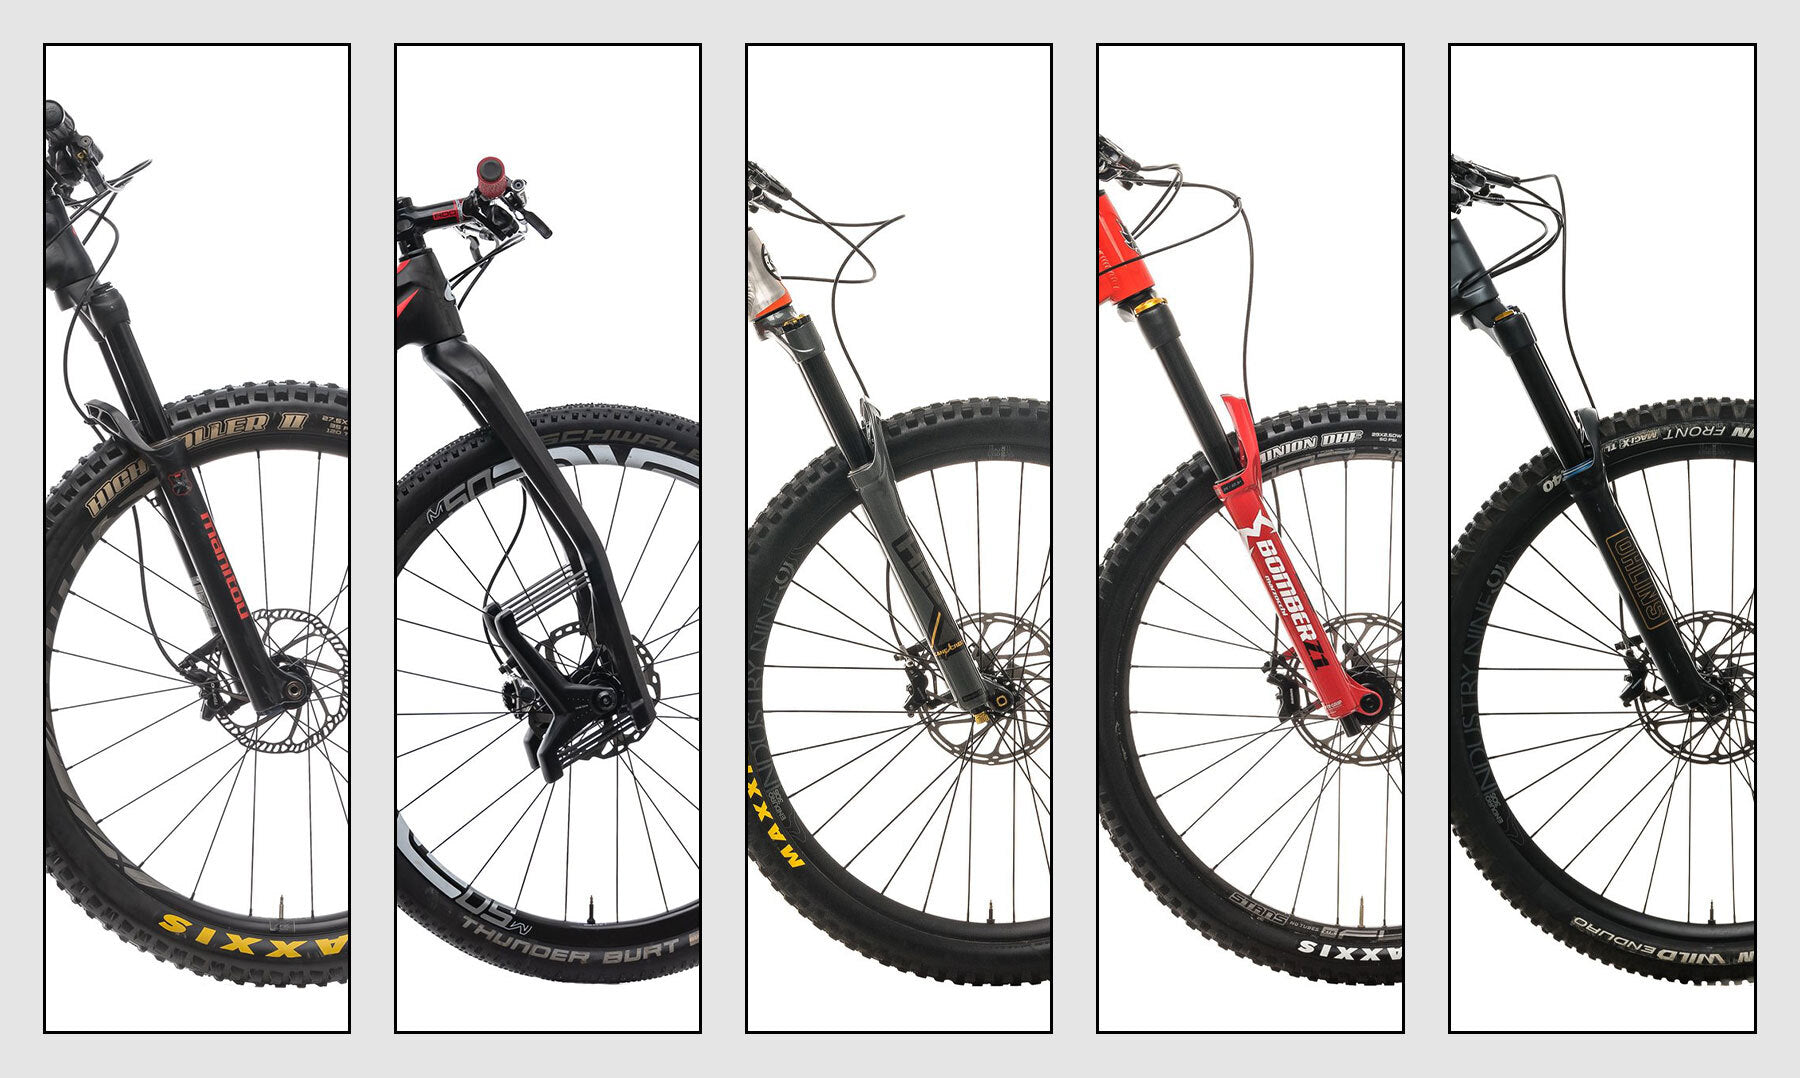 A Guide to Uncommon MTB Fork/Suspension Brands: Cane Creek Helm, DVO & More